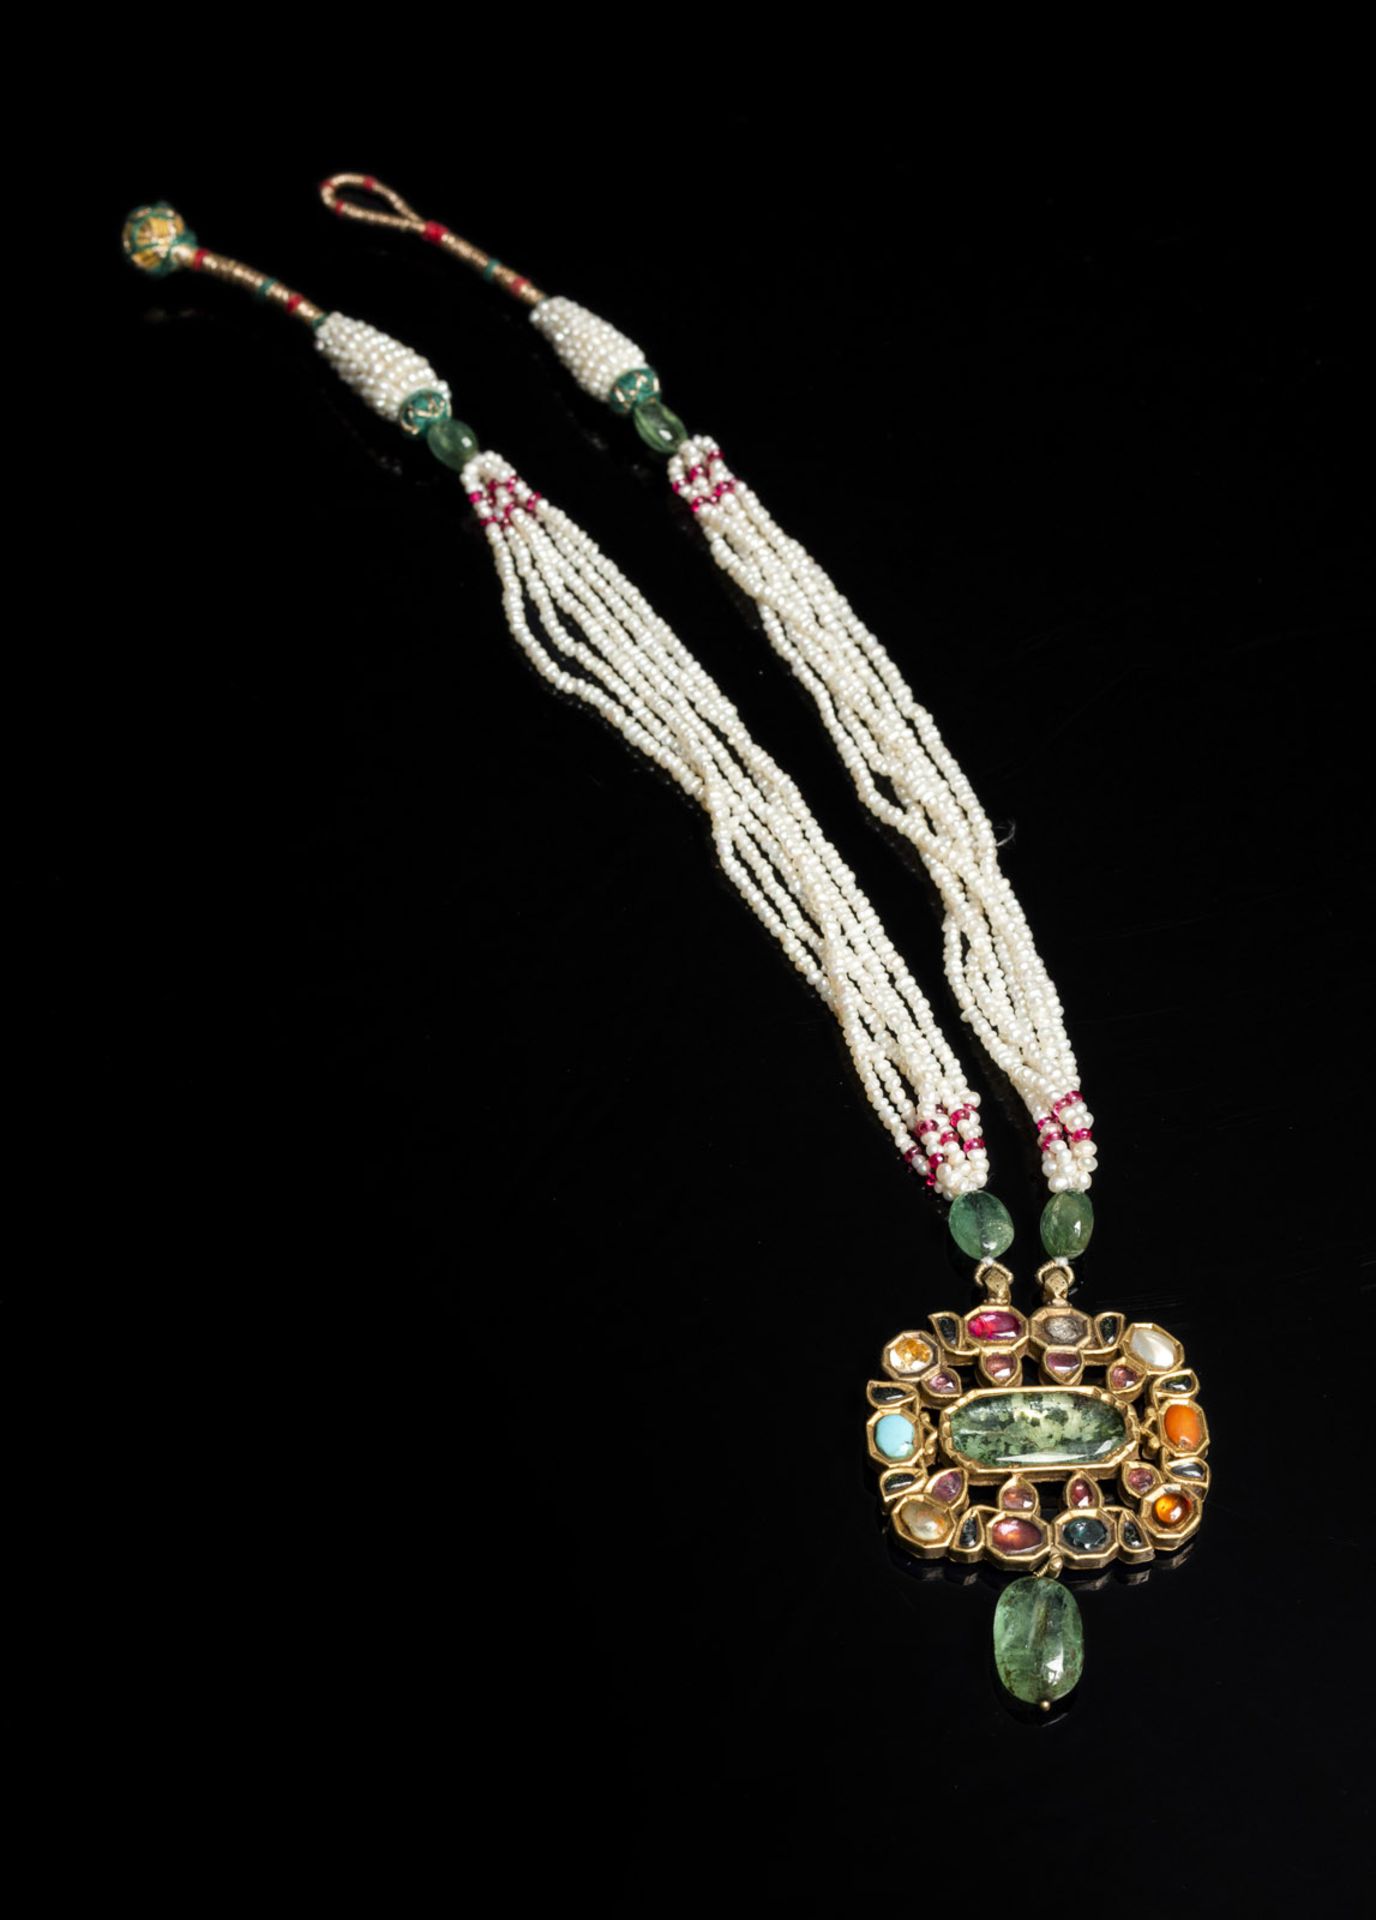 A PEARL NECKLACE WITH INLAID GOLD PENDANT IN MUGHAL STYLE